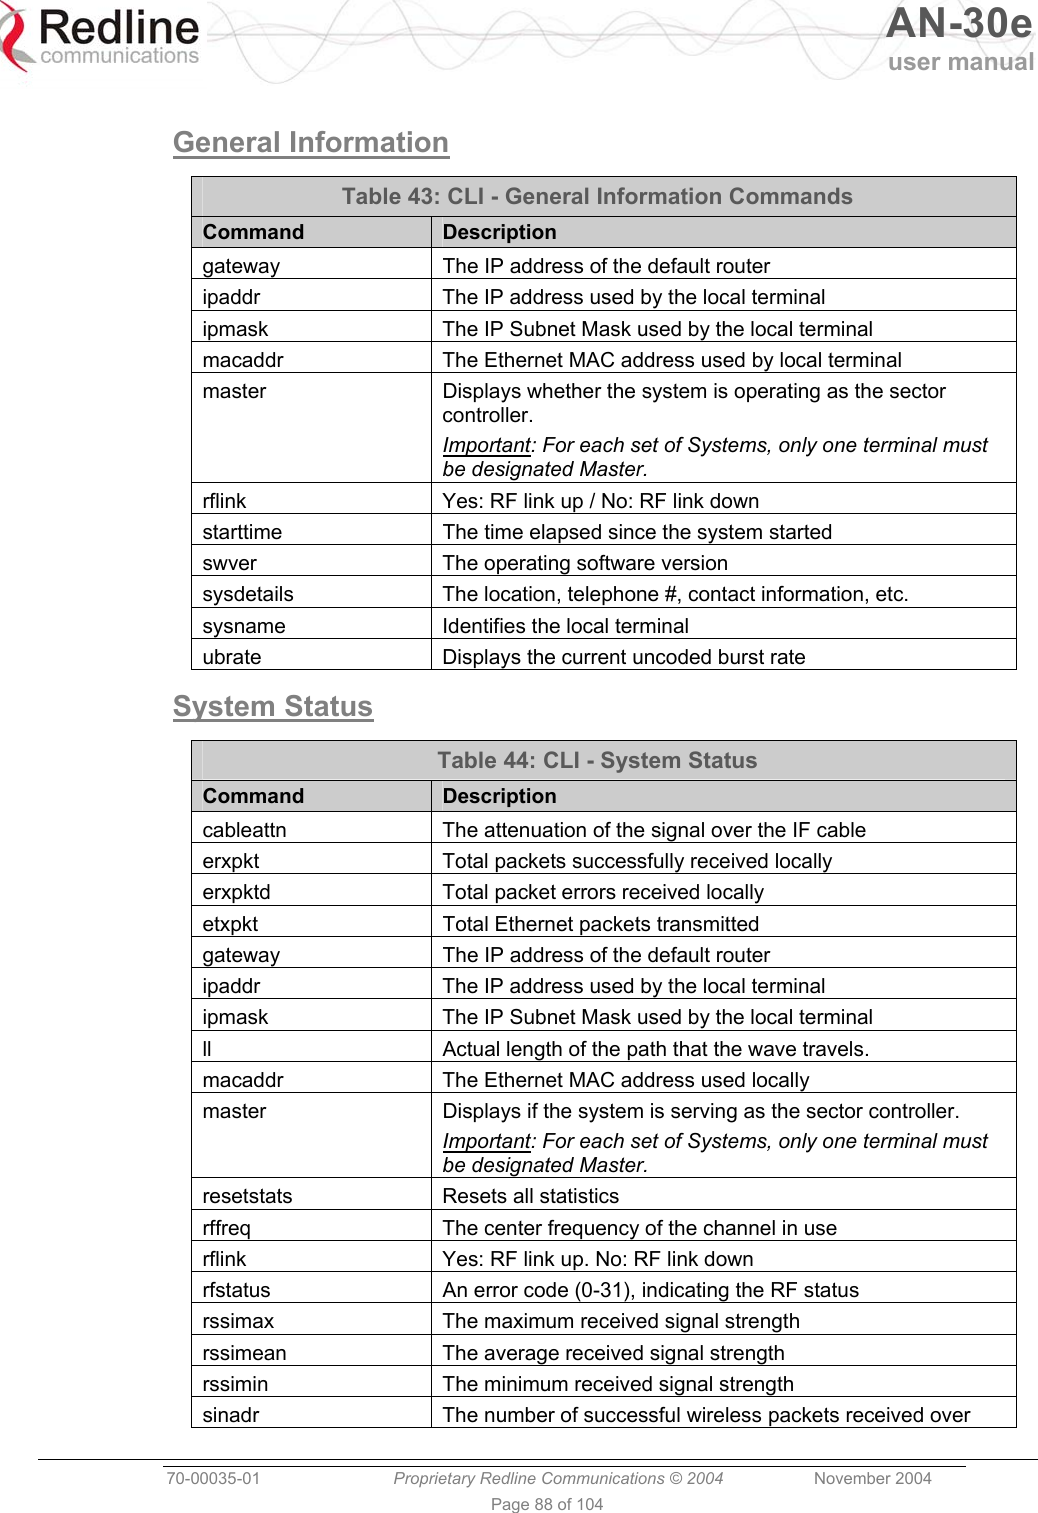   AN-30e user manual  70-00035-01  Proprietary Redline Communications © 2004 November 2004   Page 88 of 104  General Information   Table 43: CLI - General Information Commands Command  Description gateway  The IP address of the default router ipaddr  The IP address used by the local terminal ipmask  The IP Subnet Mask used by the local terminal macaddr  The Ethernet MAC address used by local terminal master  Displays whether the system is operating as the sector controller. Important: For each set of Systems, only one terminal must be designated Master. rflink  Yes: RF link up / No: RF link down starttime  The time elapsed since the system started swver  The operating software version sysdetails  The location, telephone #, contact information, etc. sysname  Identifies the local terminal ubrate  Displays the current uncoded burst rate System Status   Table 44: CLI - System Status Command  Description cableattn  The attenuation of the signal over the IF cable erxpkt  Total packets successfully received locally erxpktd  Total packet errors received locally etxpkt  Total Ethernet packets transmitted gateway  The IP address of the default router ipaddr  The IP address used by the local terminal ipmask  The IP Subnet Mask used by the local terminal ll  Actual length of the path that the wave travels. macaddr  The Ethernet MAC address used locally master  Displays if the system is serving as the sector controller. Important: For each set of Systems, only one terminal must be designated Master. resetstats Resets all statistics rffreq  The center frequency of the channel in use rflink  Yes: RF link up. No: RF link down rfstatus  An error code (0-31), indicating the RF status rssimax  The maximum received signal strength rssimean  The average received signal strength rssimin  The minimum received signal strength sinadr  The number of successful wireless packets received over 